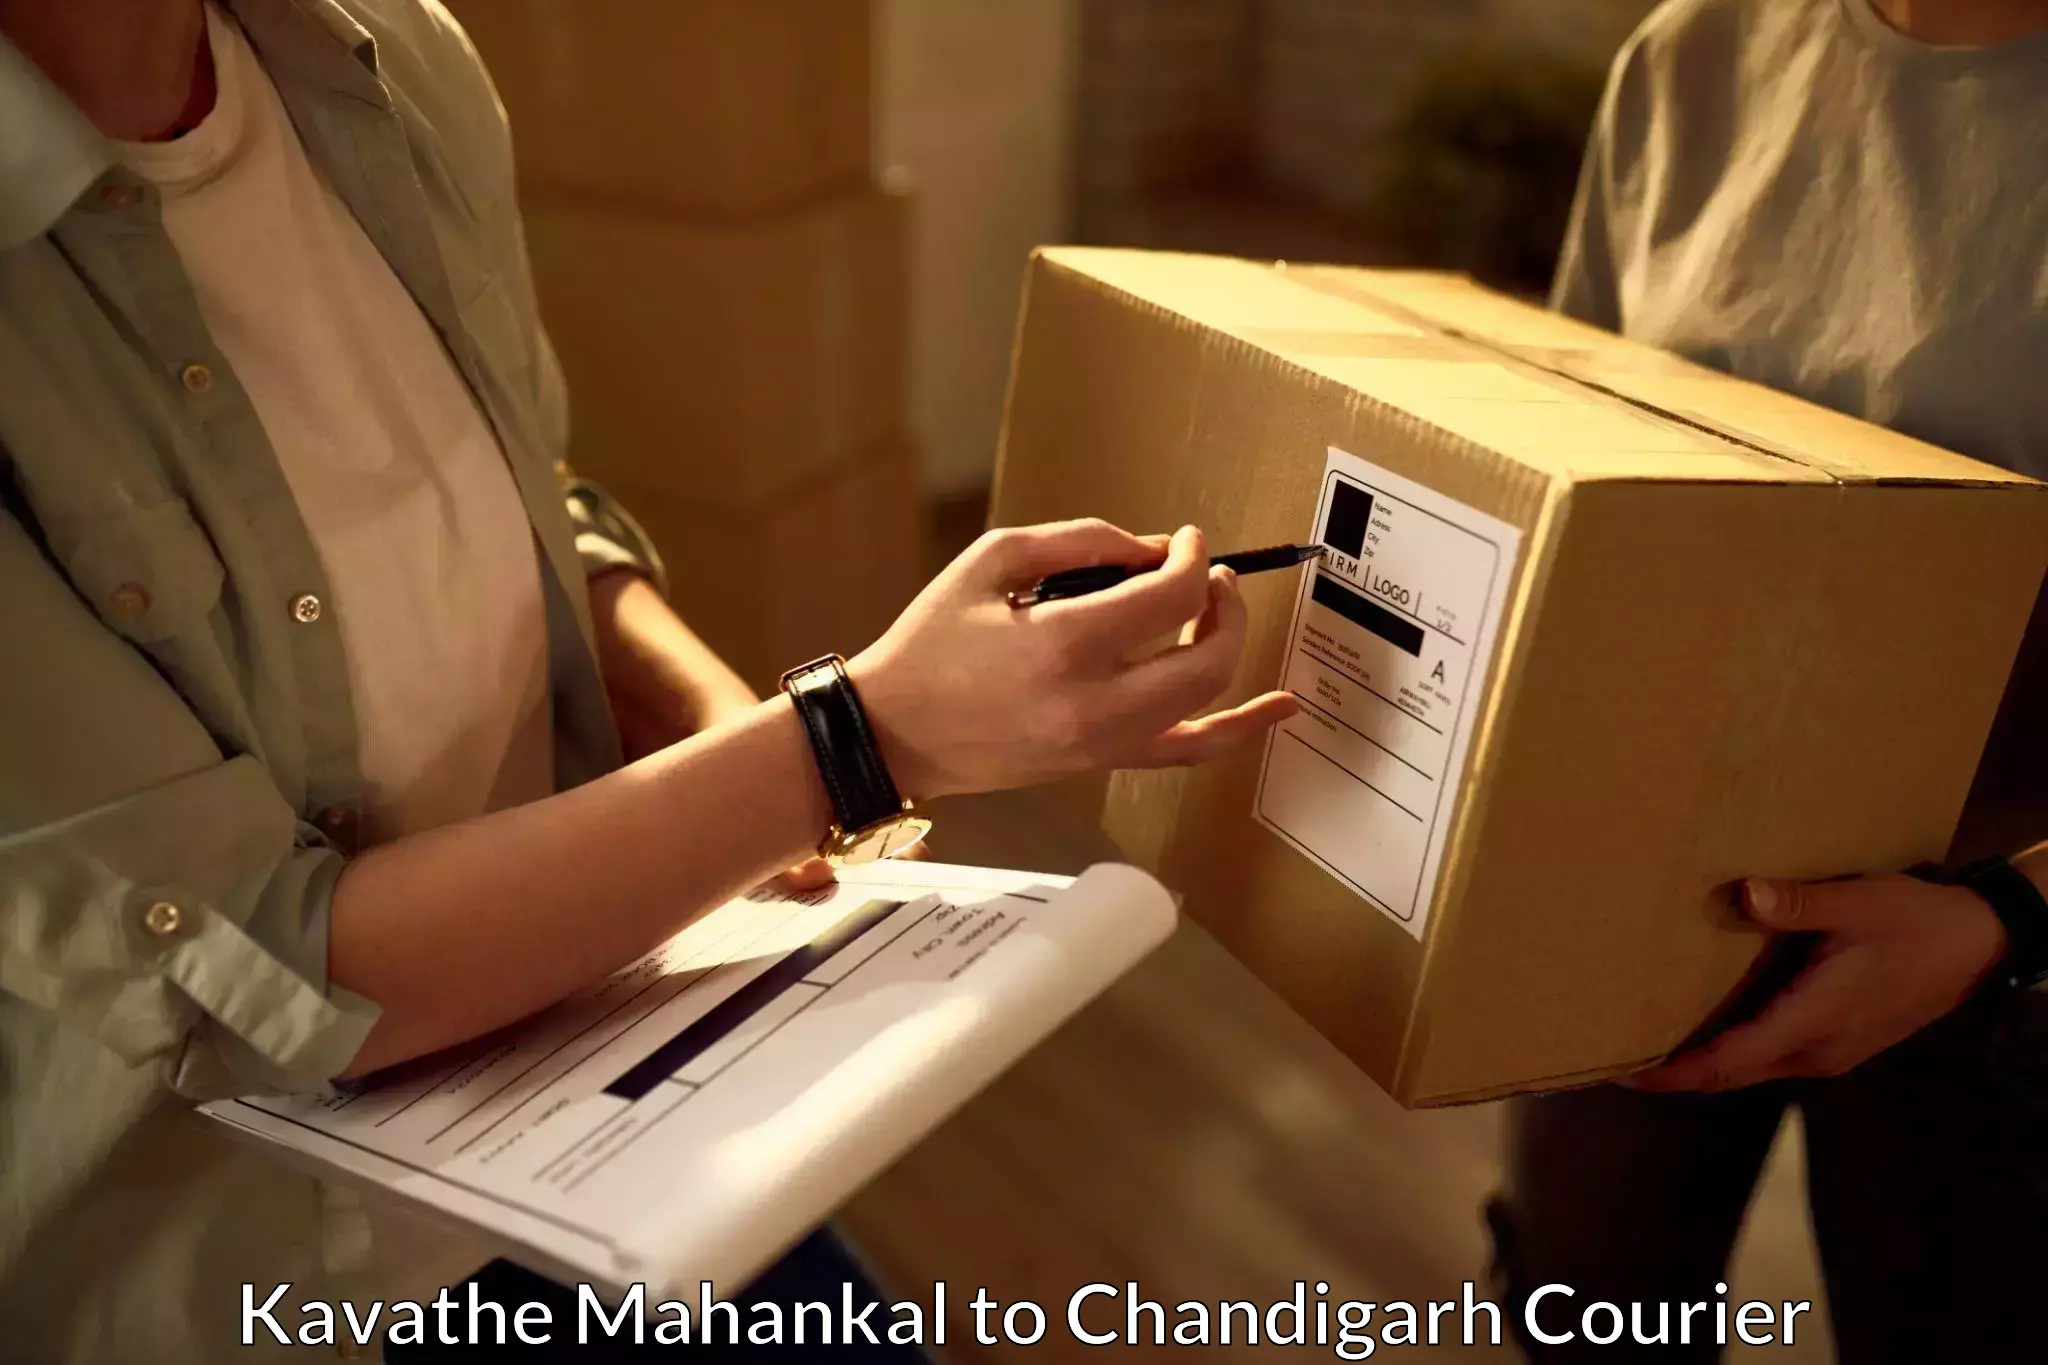 Express courier capabilities Kavathe Mahankal to Chandigarh